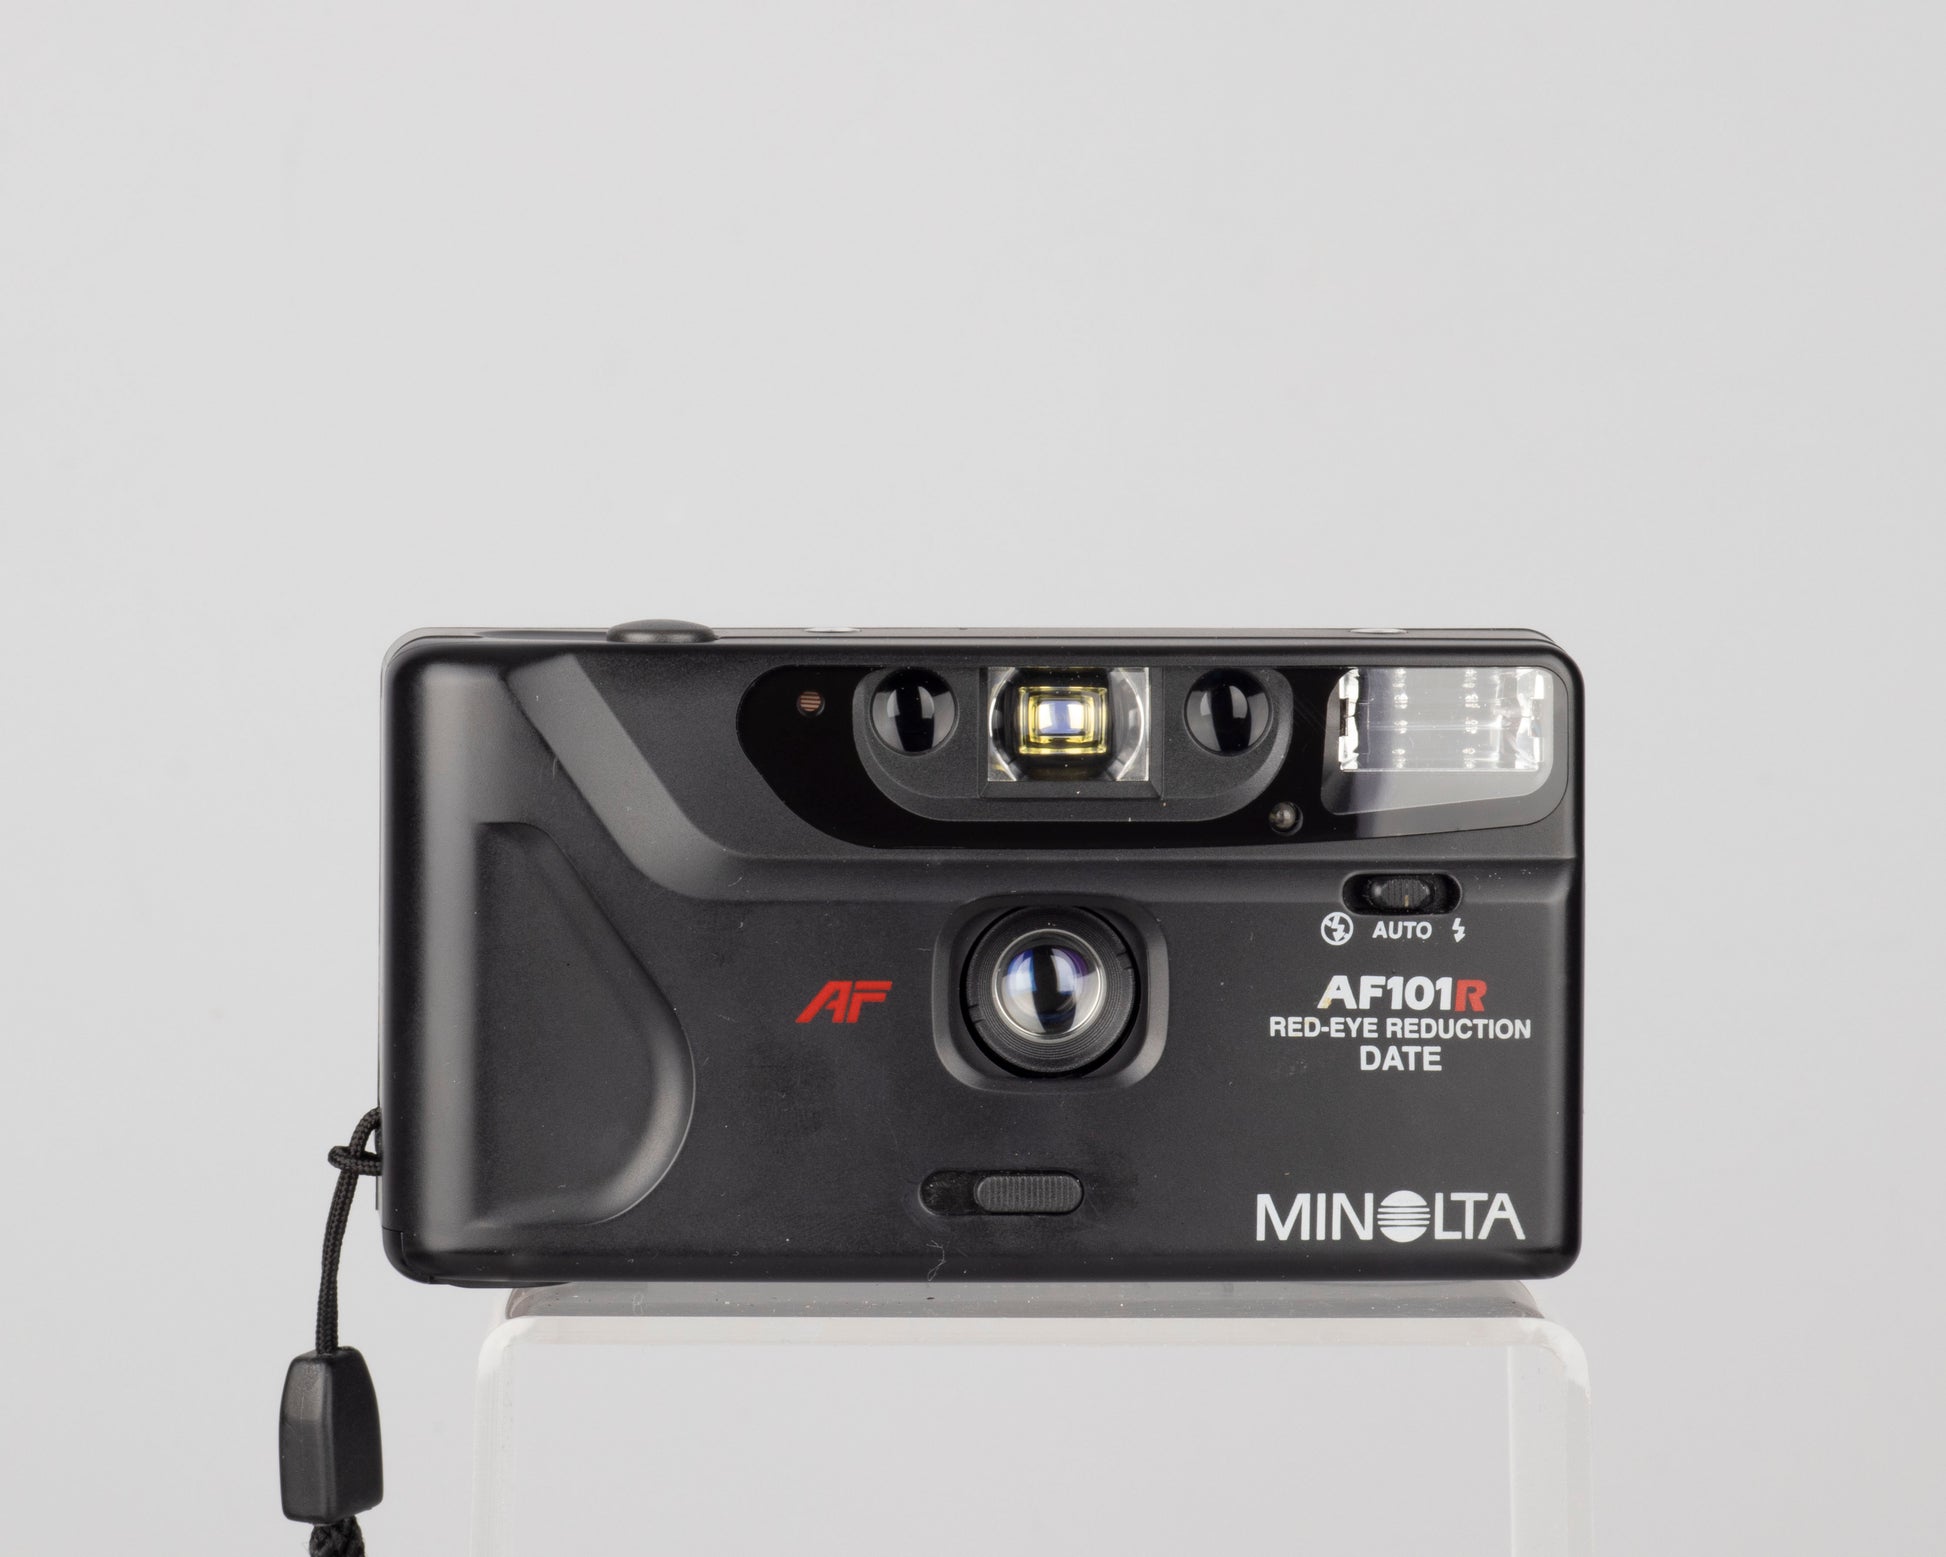 The Minolta AF101R is an elegant ultra-compact 35mm point-and-shoot camera with a 28mm wide angle lens